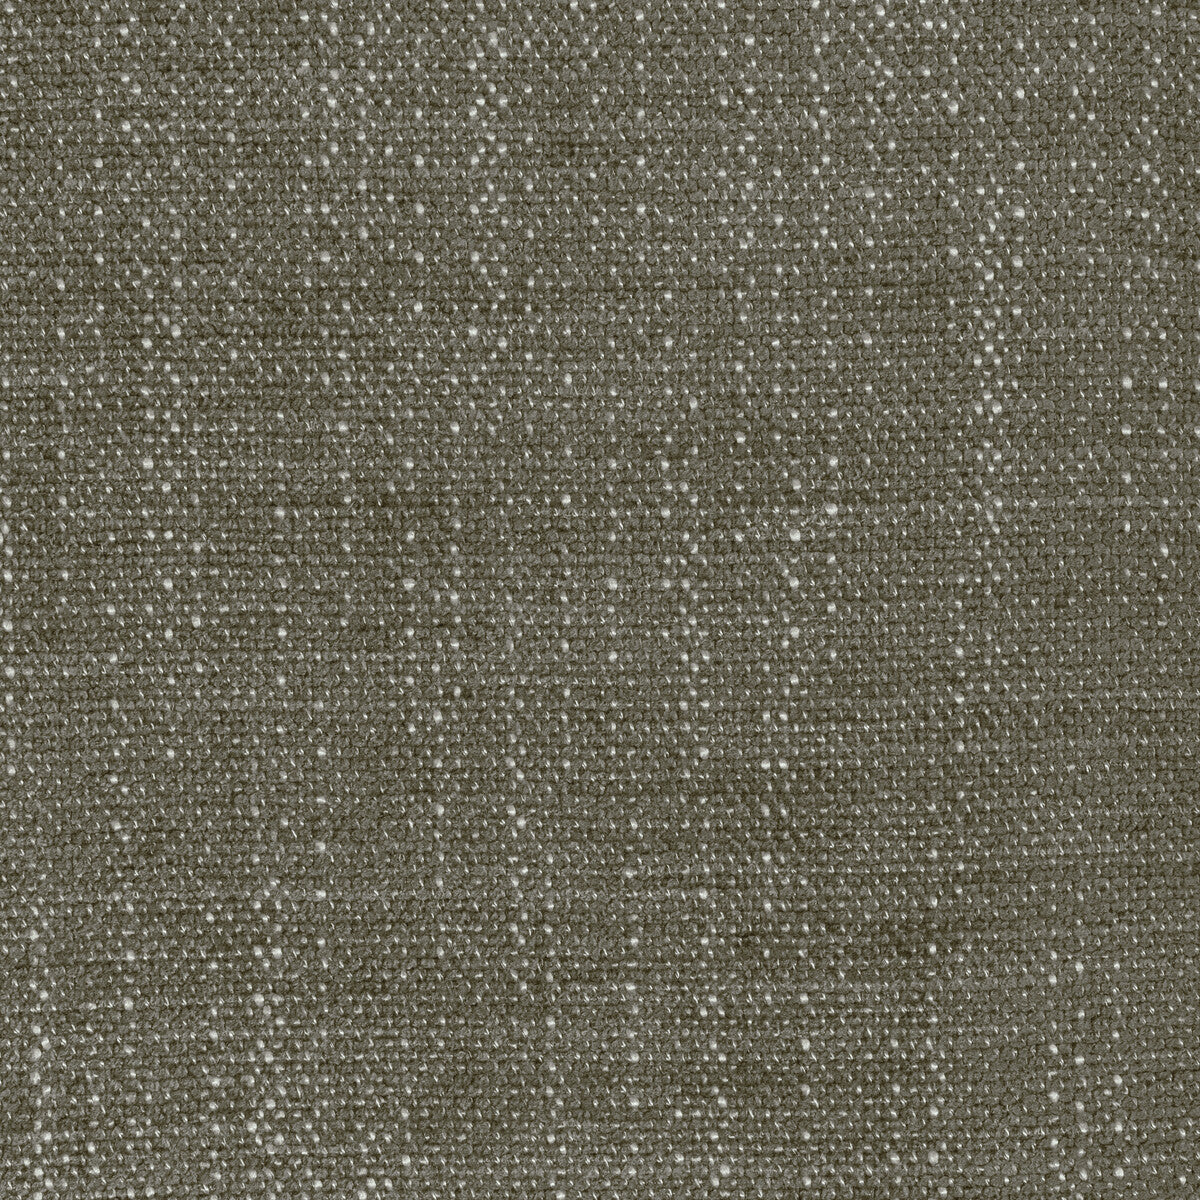 Kravet Design fabric in 36408-21 color - pattern 36408.21.0 - by Kravet Design in the Performance Crypton Home collection